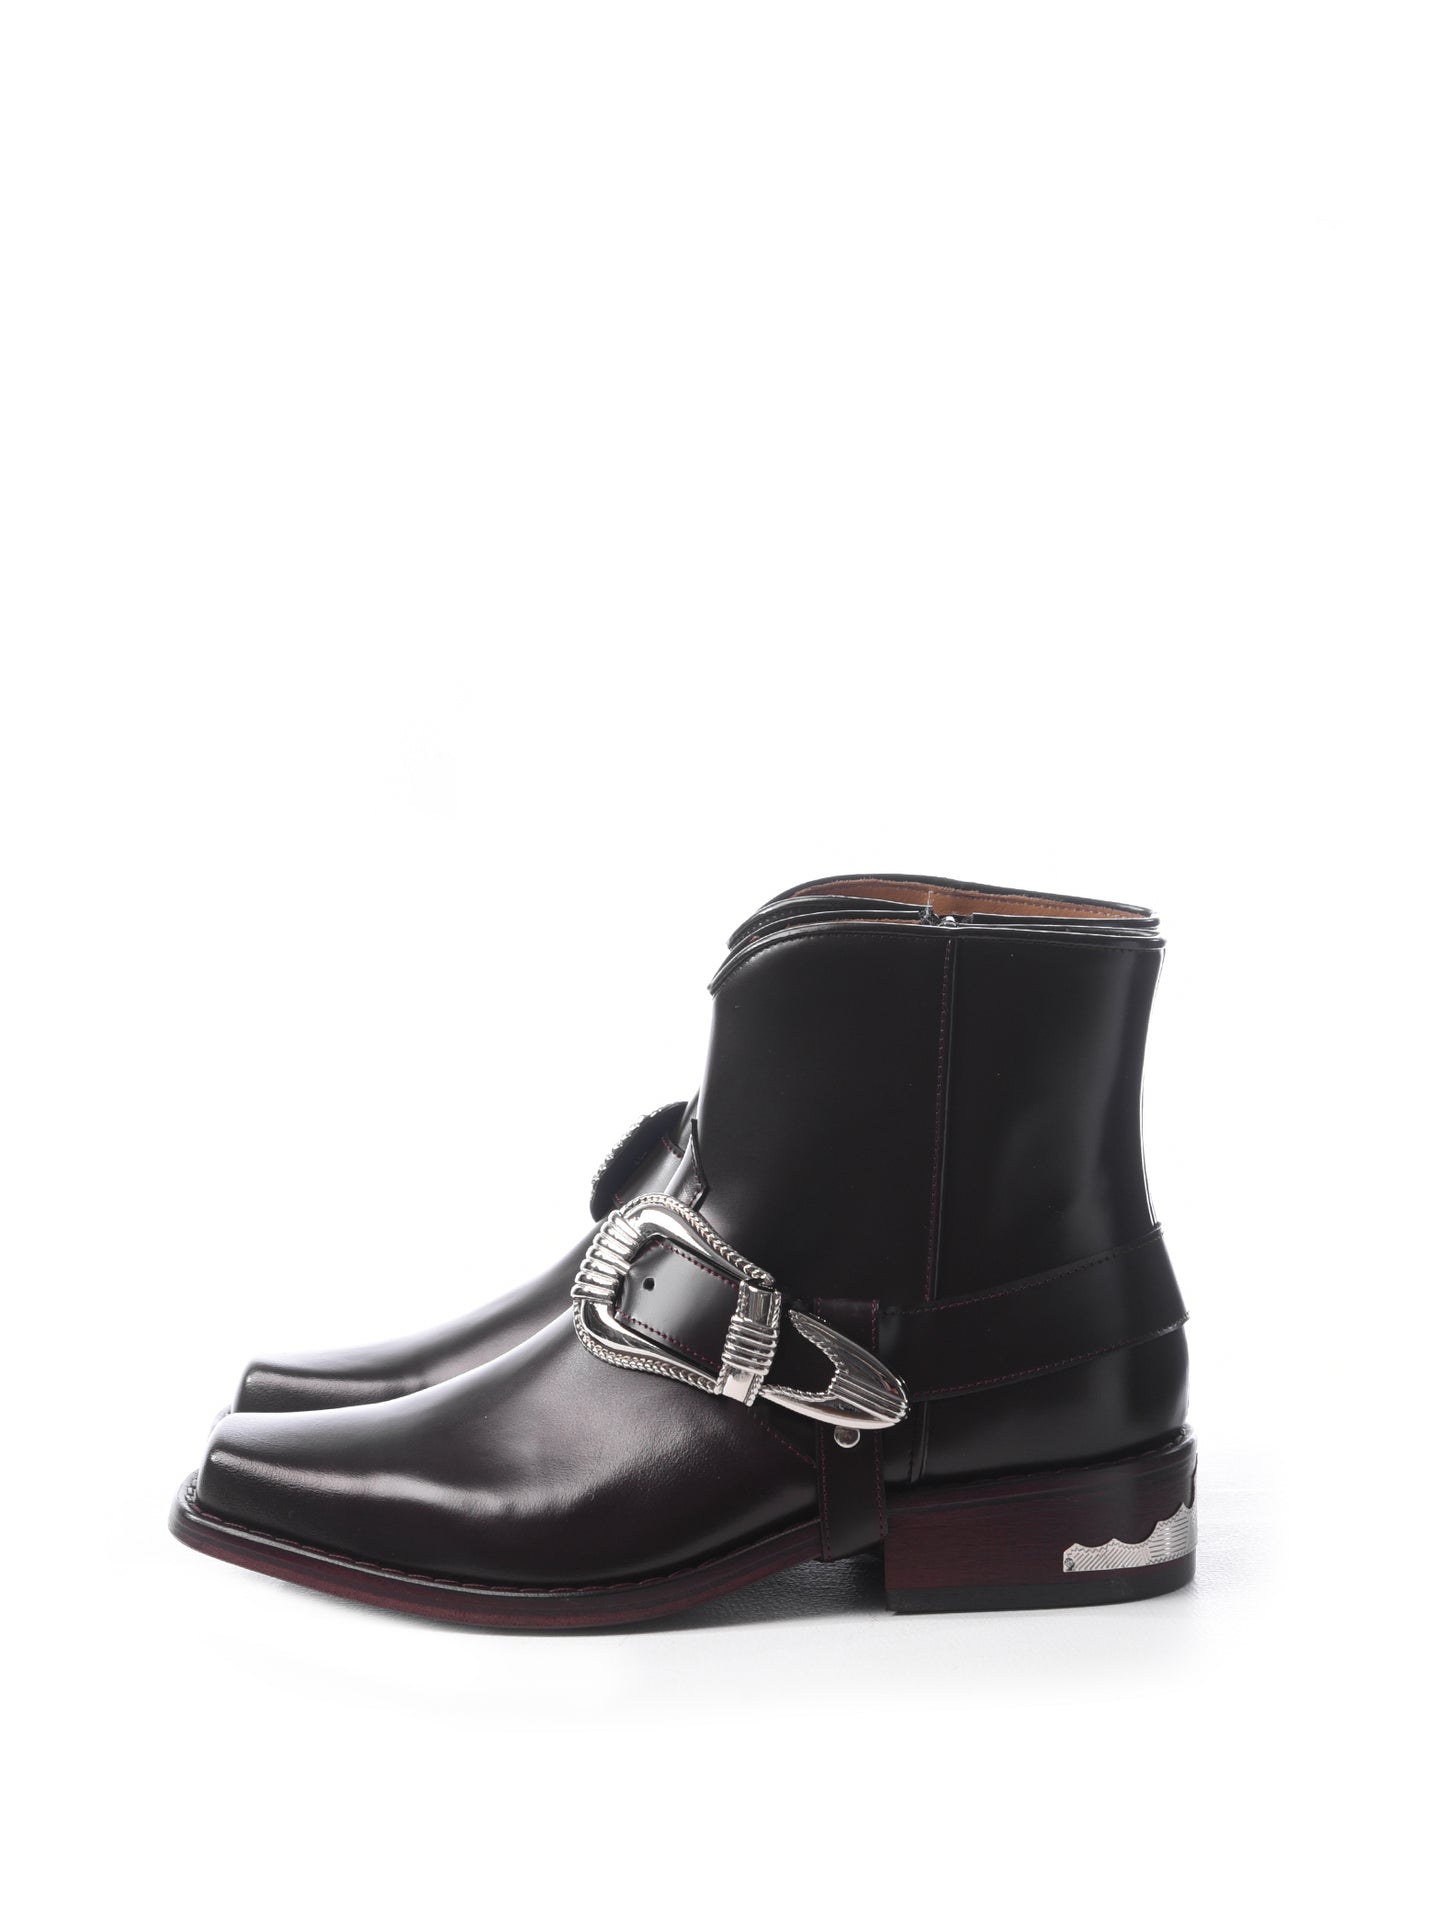 Toga Archives Oxblood Leather Polido Buckle Boots